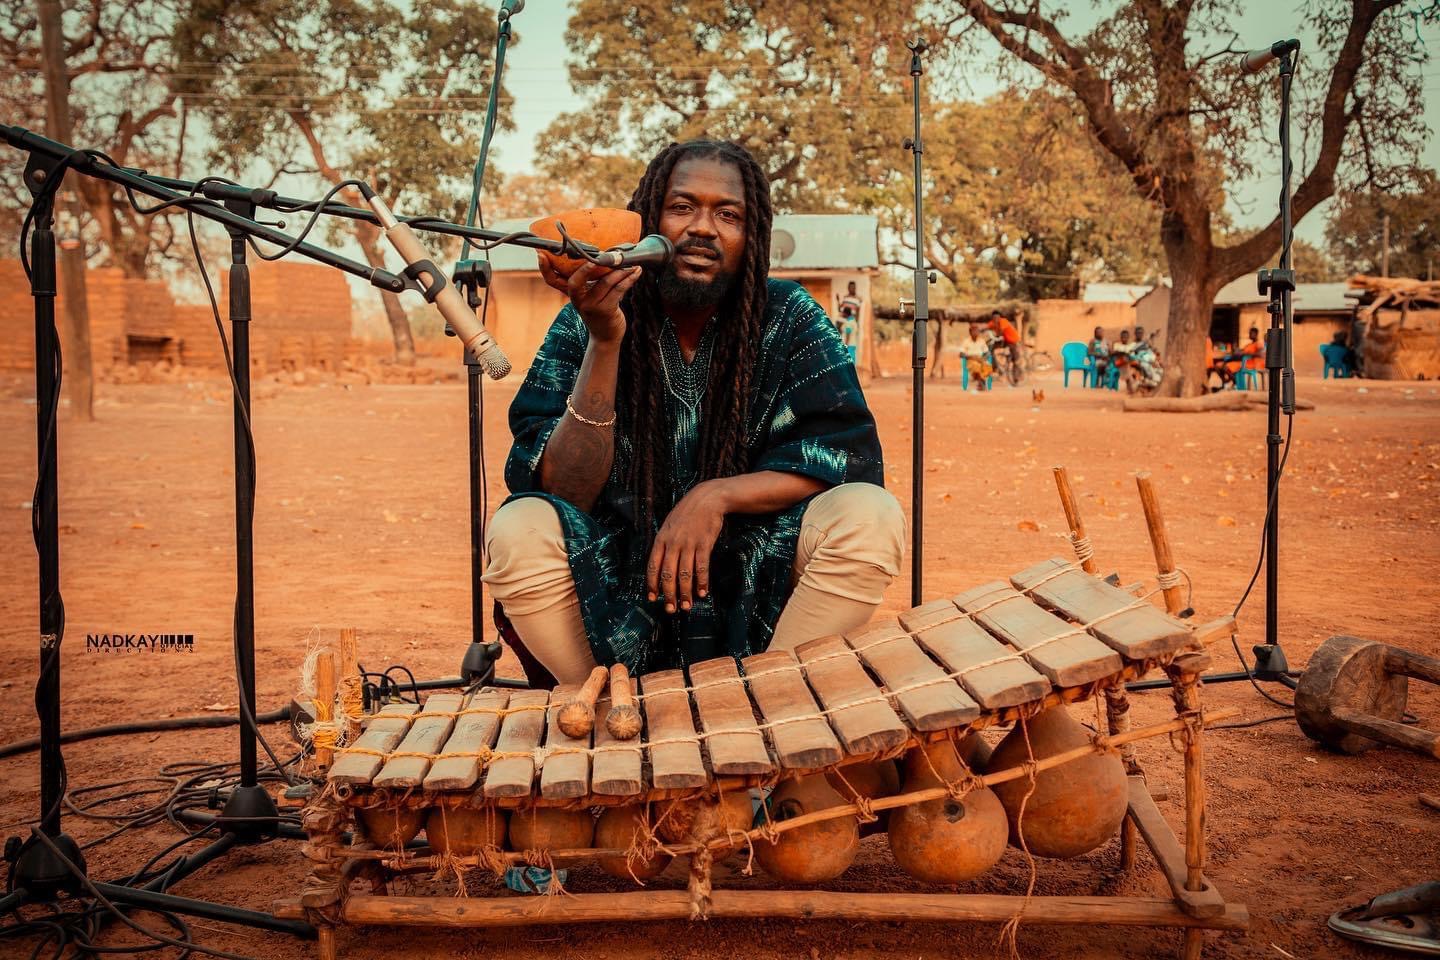 Samini claims the Reggae space again with “Be Alright” Official Video – WATCH